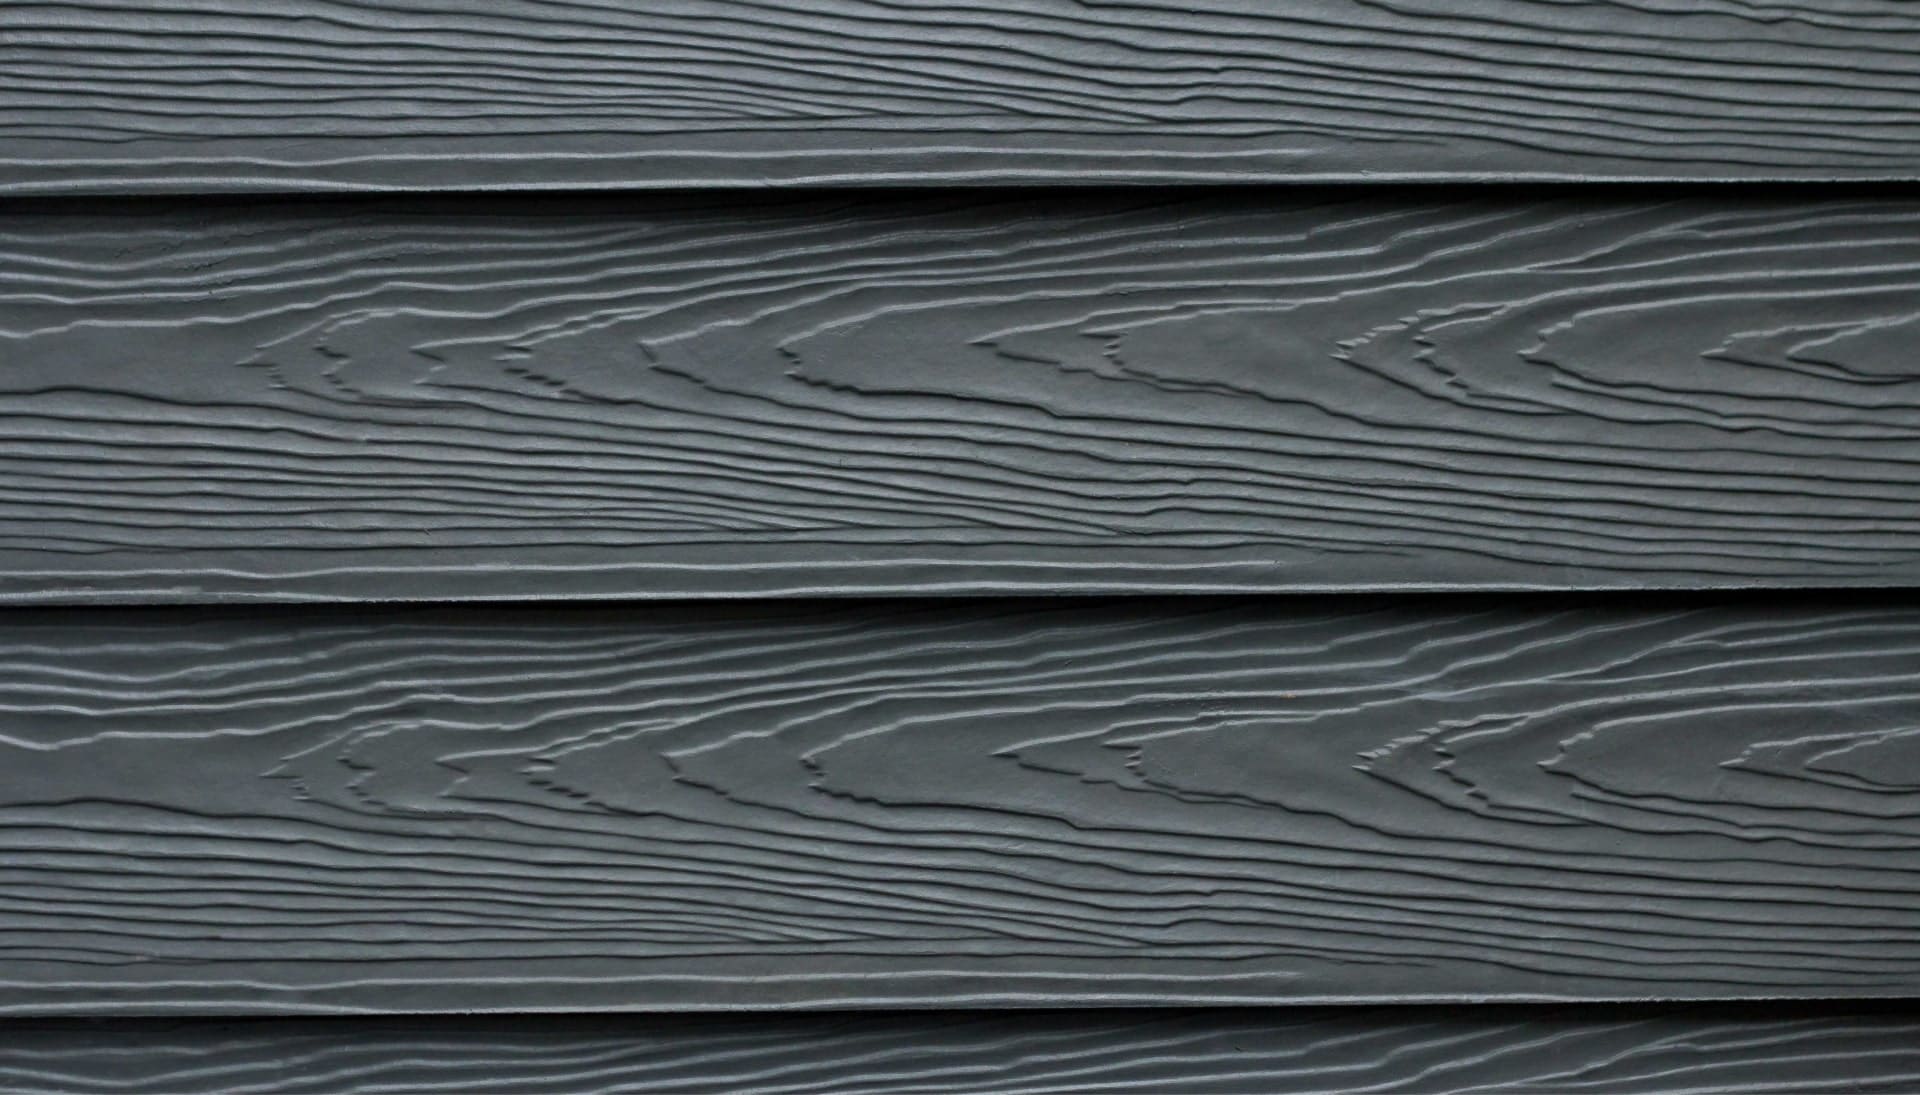 Fiber cement siding installation experts in Charles Town, West Virginia